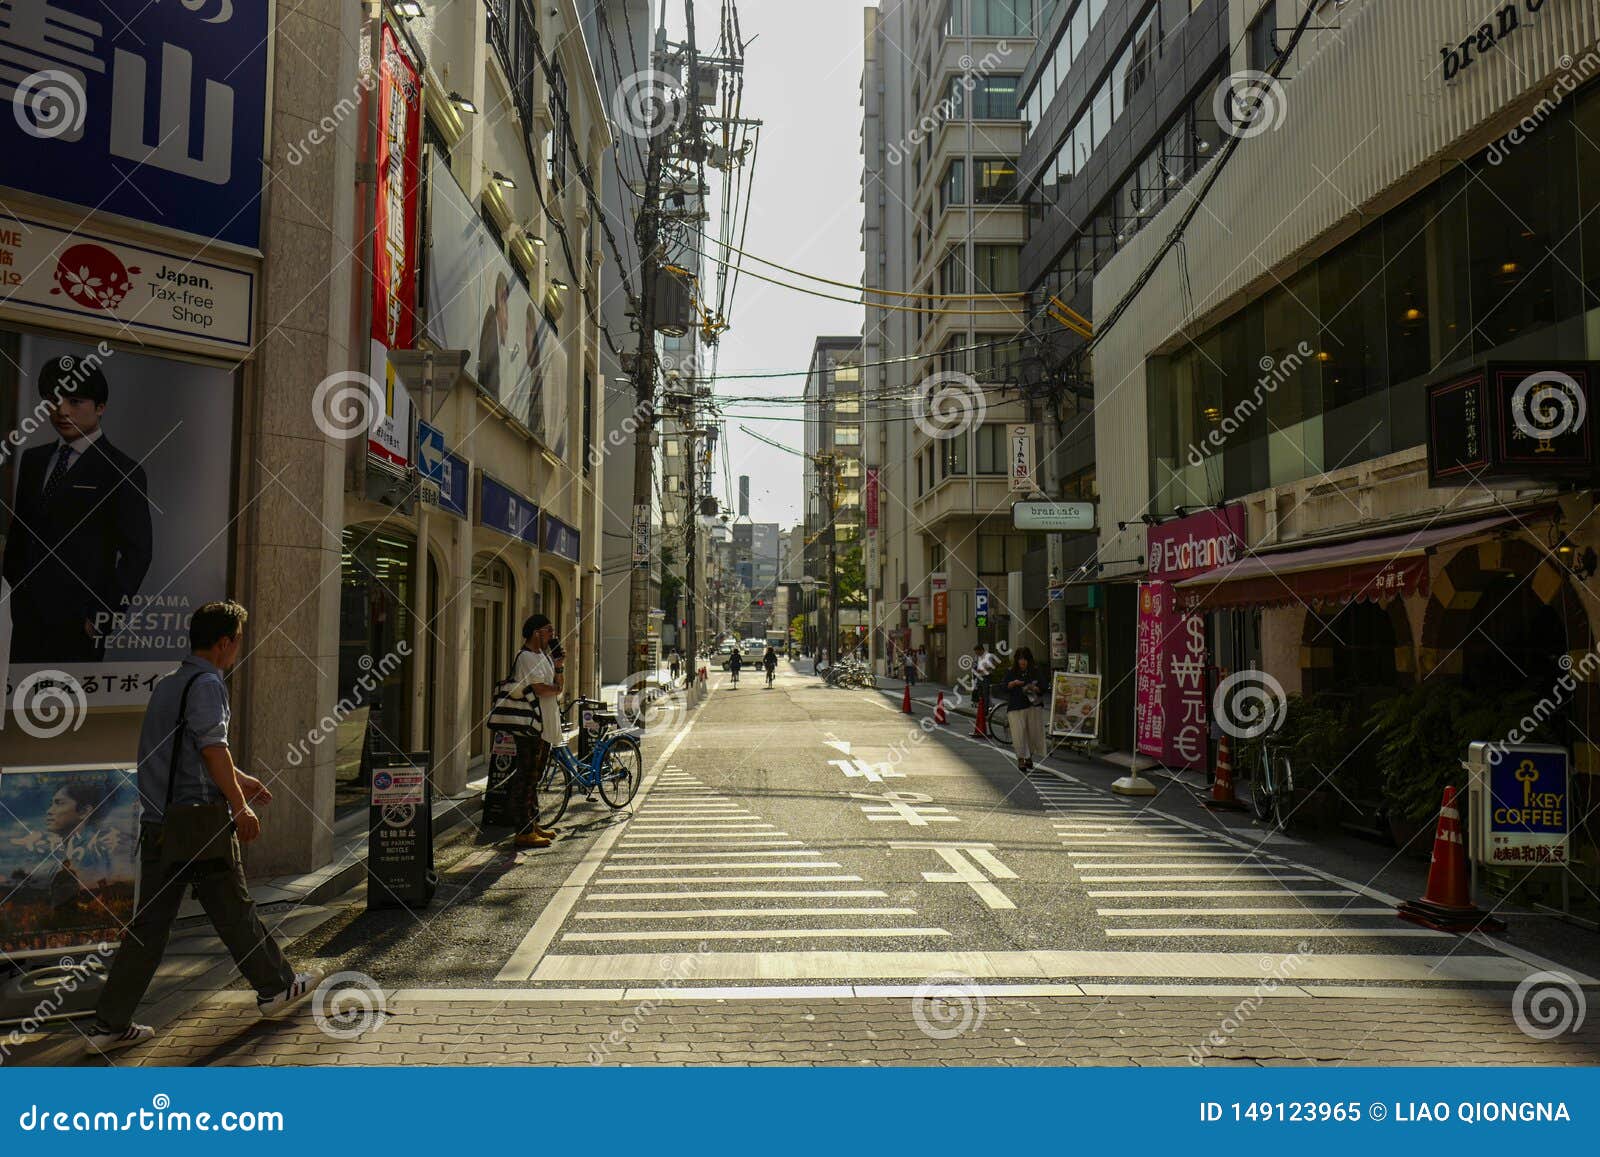 530 Chuo Ward Photos Free Royalty Free Stock Photos From Dreamstime